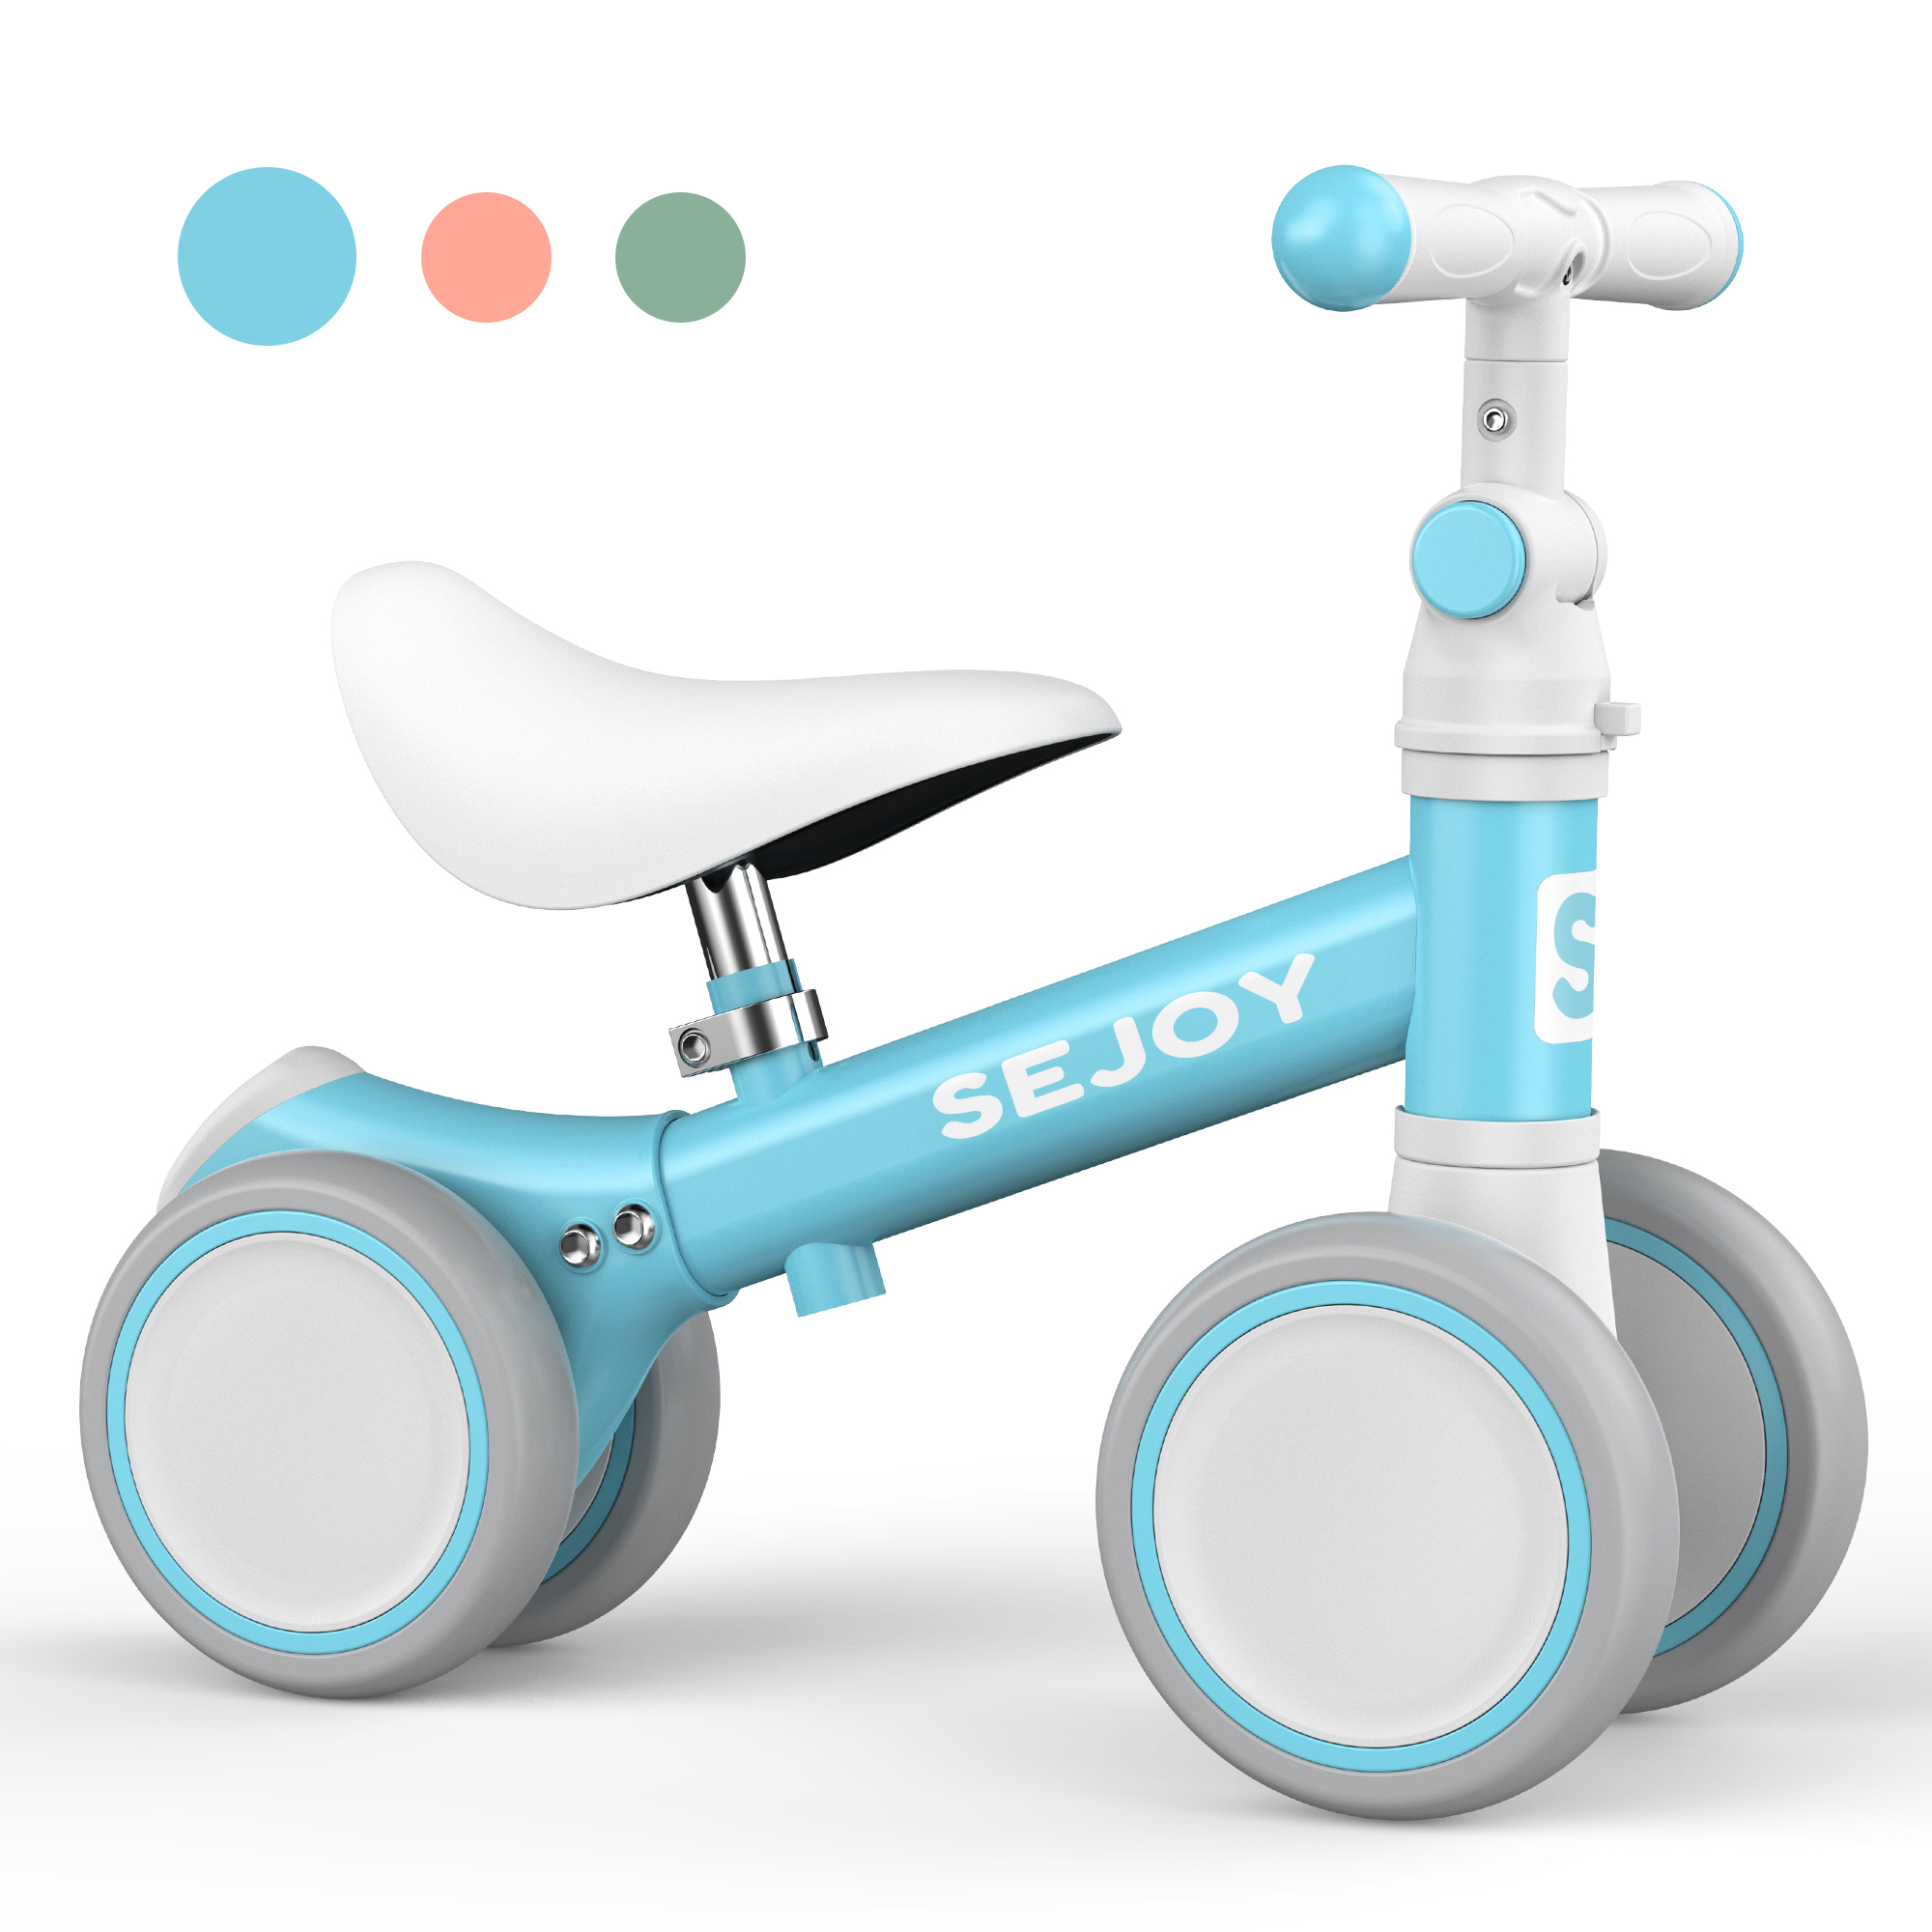 Sejoy Baby Balance Bike, Toddler Baby Bicycle with 4 Wheels for 10-36 Months, Adjustable Handlebar Baby Outdoor Bike Riding Toy, First B-day Gift - image 1 of 8